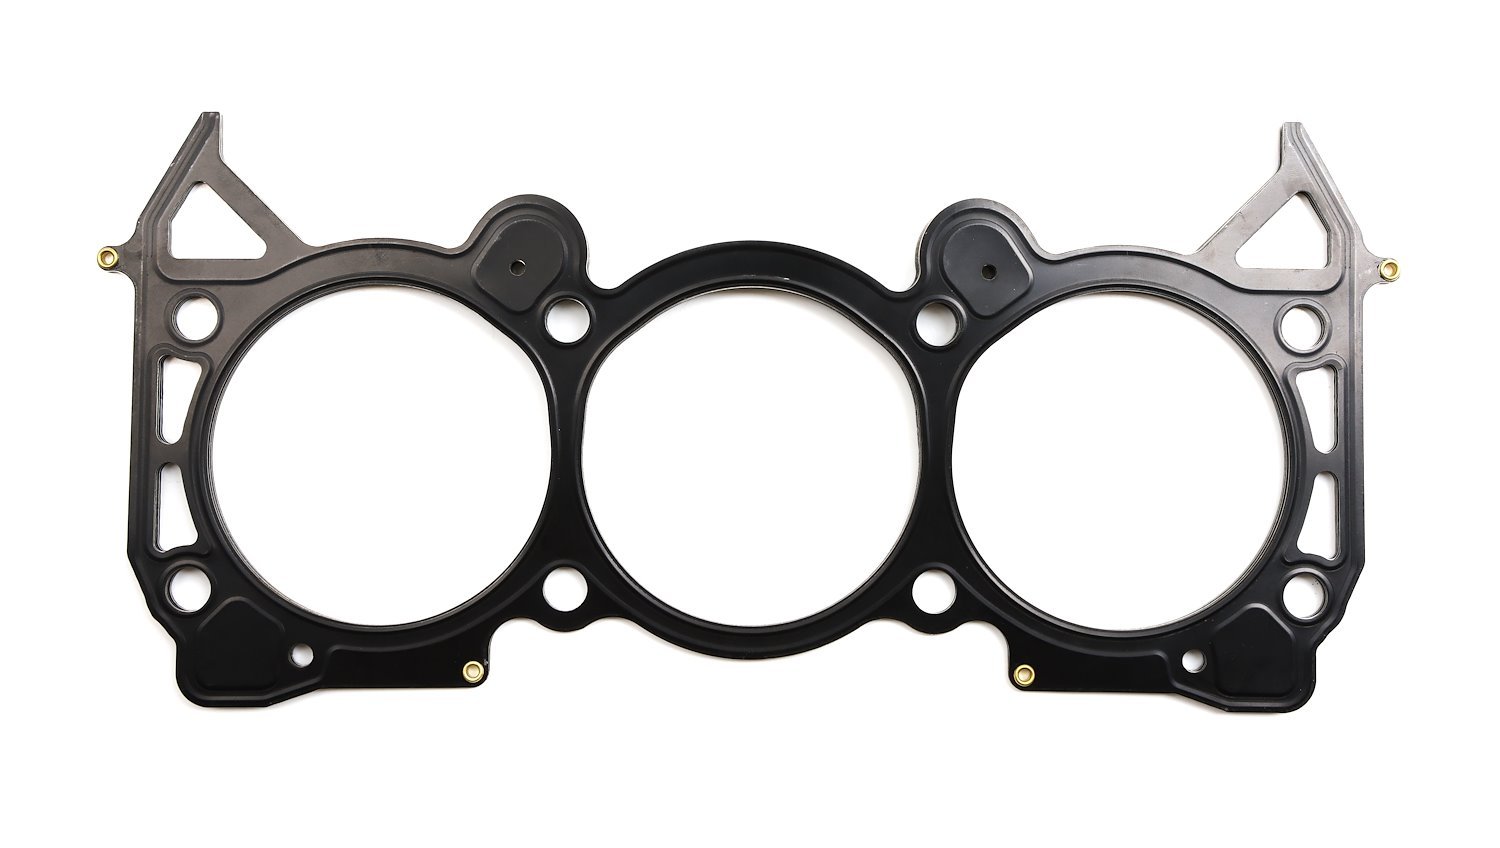 Head Gasket for 1983-1987 Buick Regal with LC2, LC4, LC6, LC8, LC9, LD5 V6 Engines